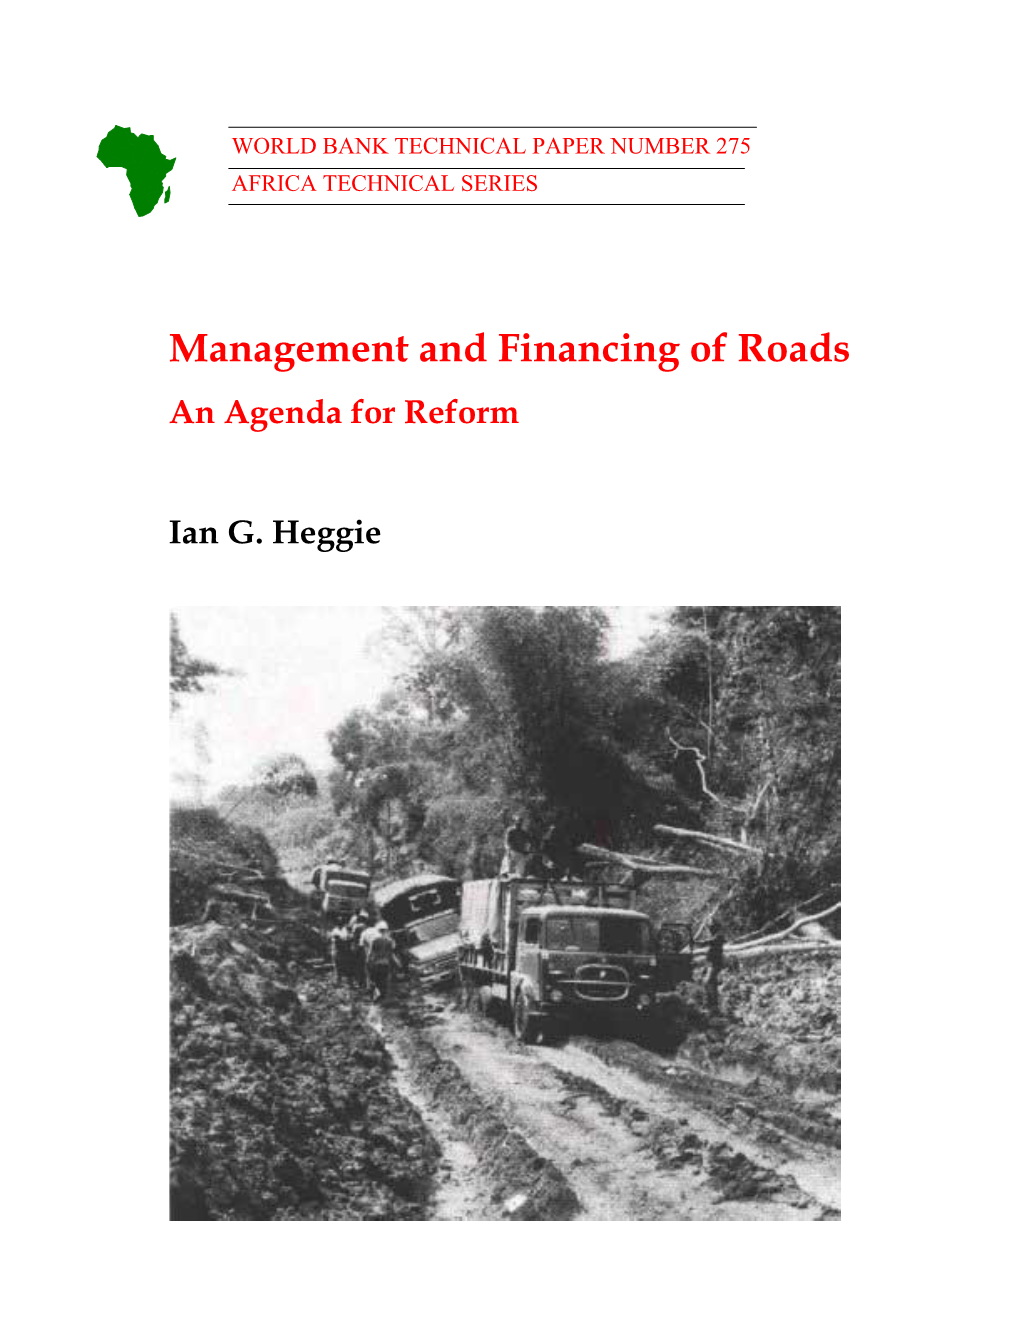 Management and Financing of Roads an Agenda for Reform